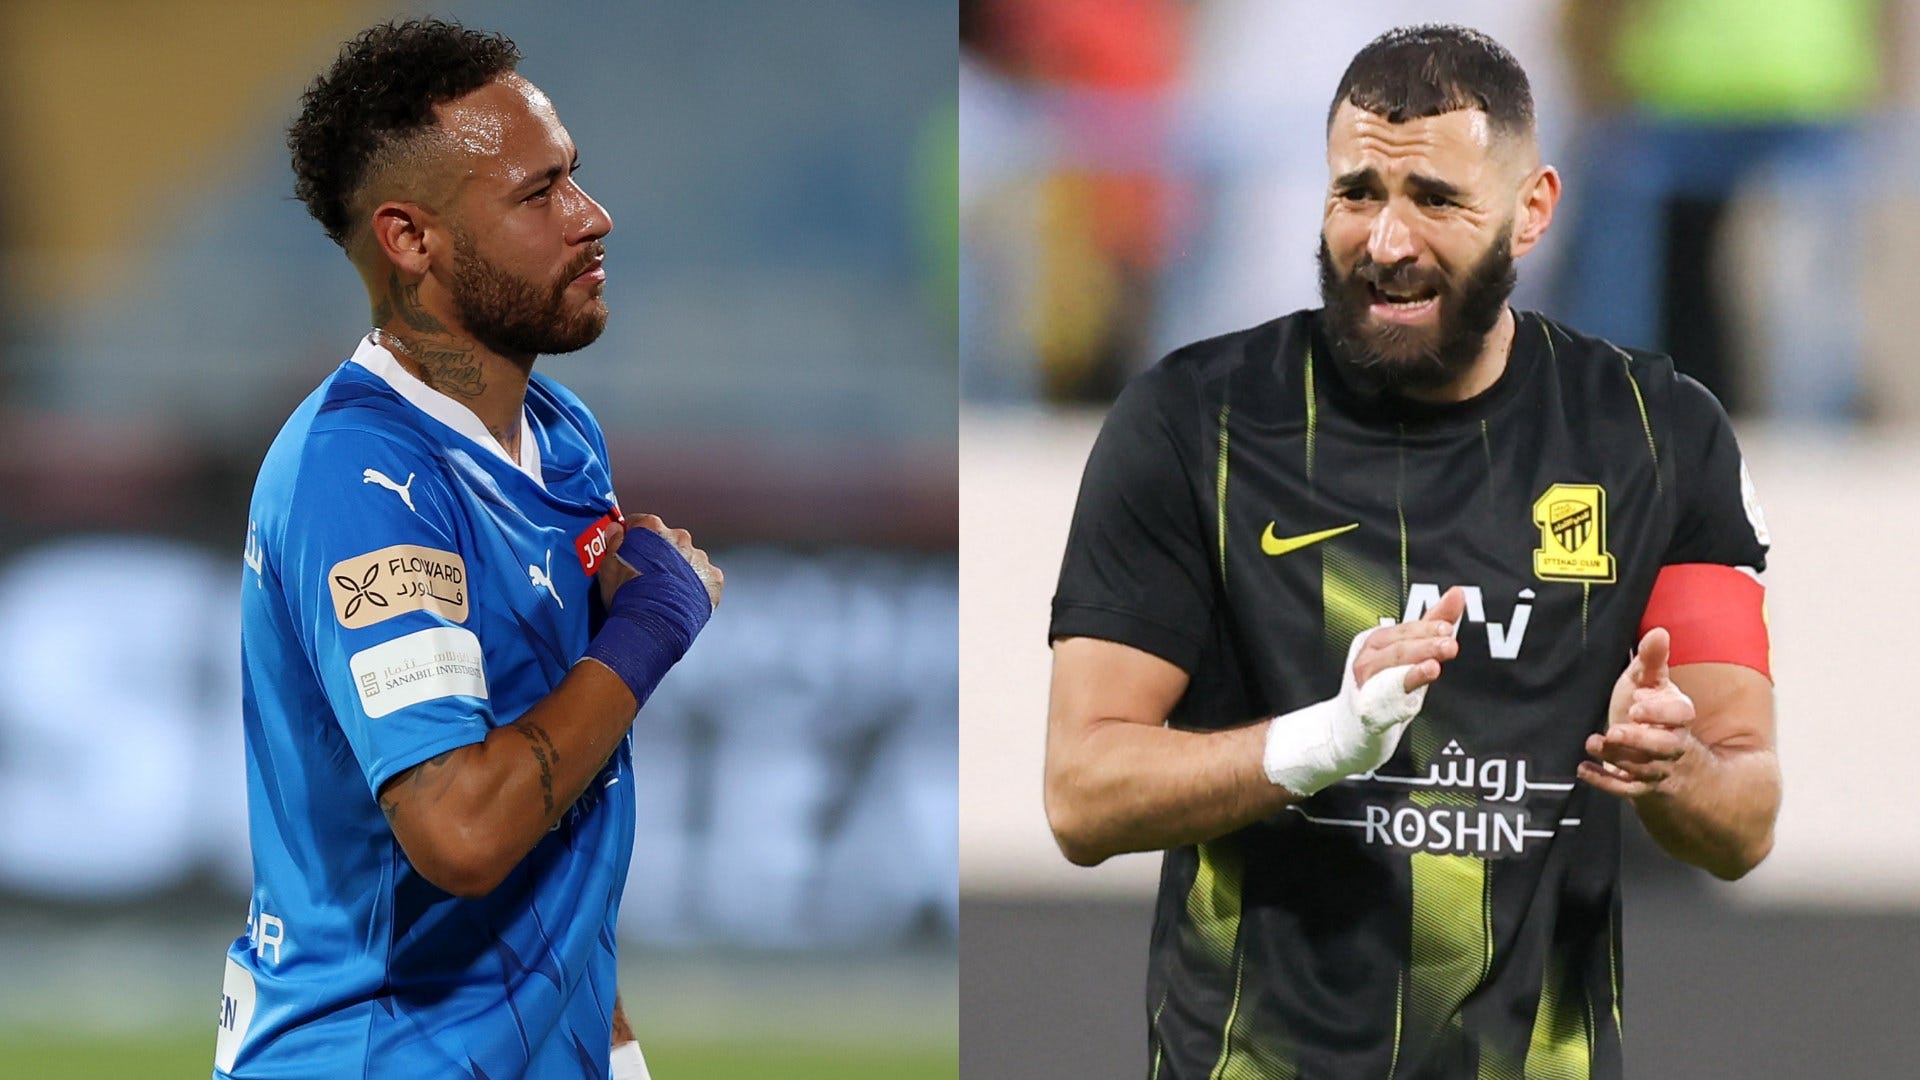 Welcome to the party, Neymar! Saudi Pro League winners & losers as Al-Hilal’s biggest star finally debuts while ‘lazy’ Karim Benzema feels the ire of Al-Ittihad supporters | Goal.com UK